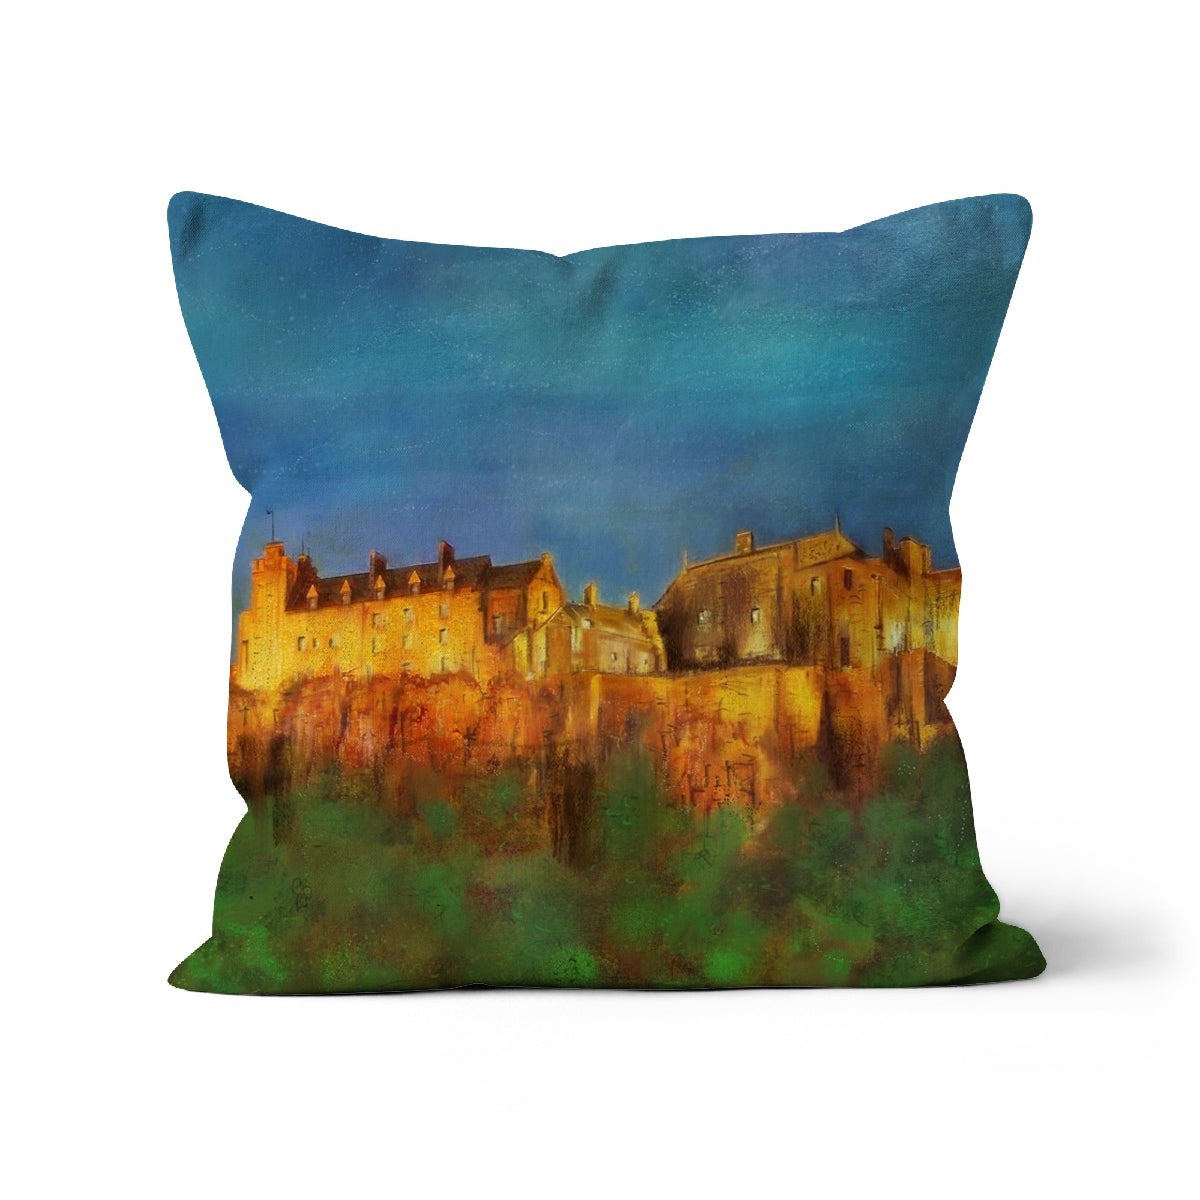 Stirling Castle Art Gifts Cushion-Cushions-Historic & Iconic Scotland Art Gallery-Linen-16"x16"-Paintings, Prints, Homeware, Art Gifts From Scotland By Scottish Artist Kevin Hunter